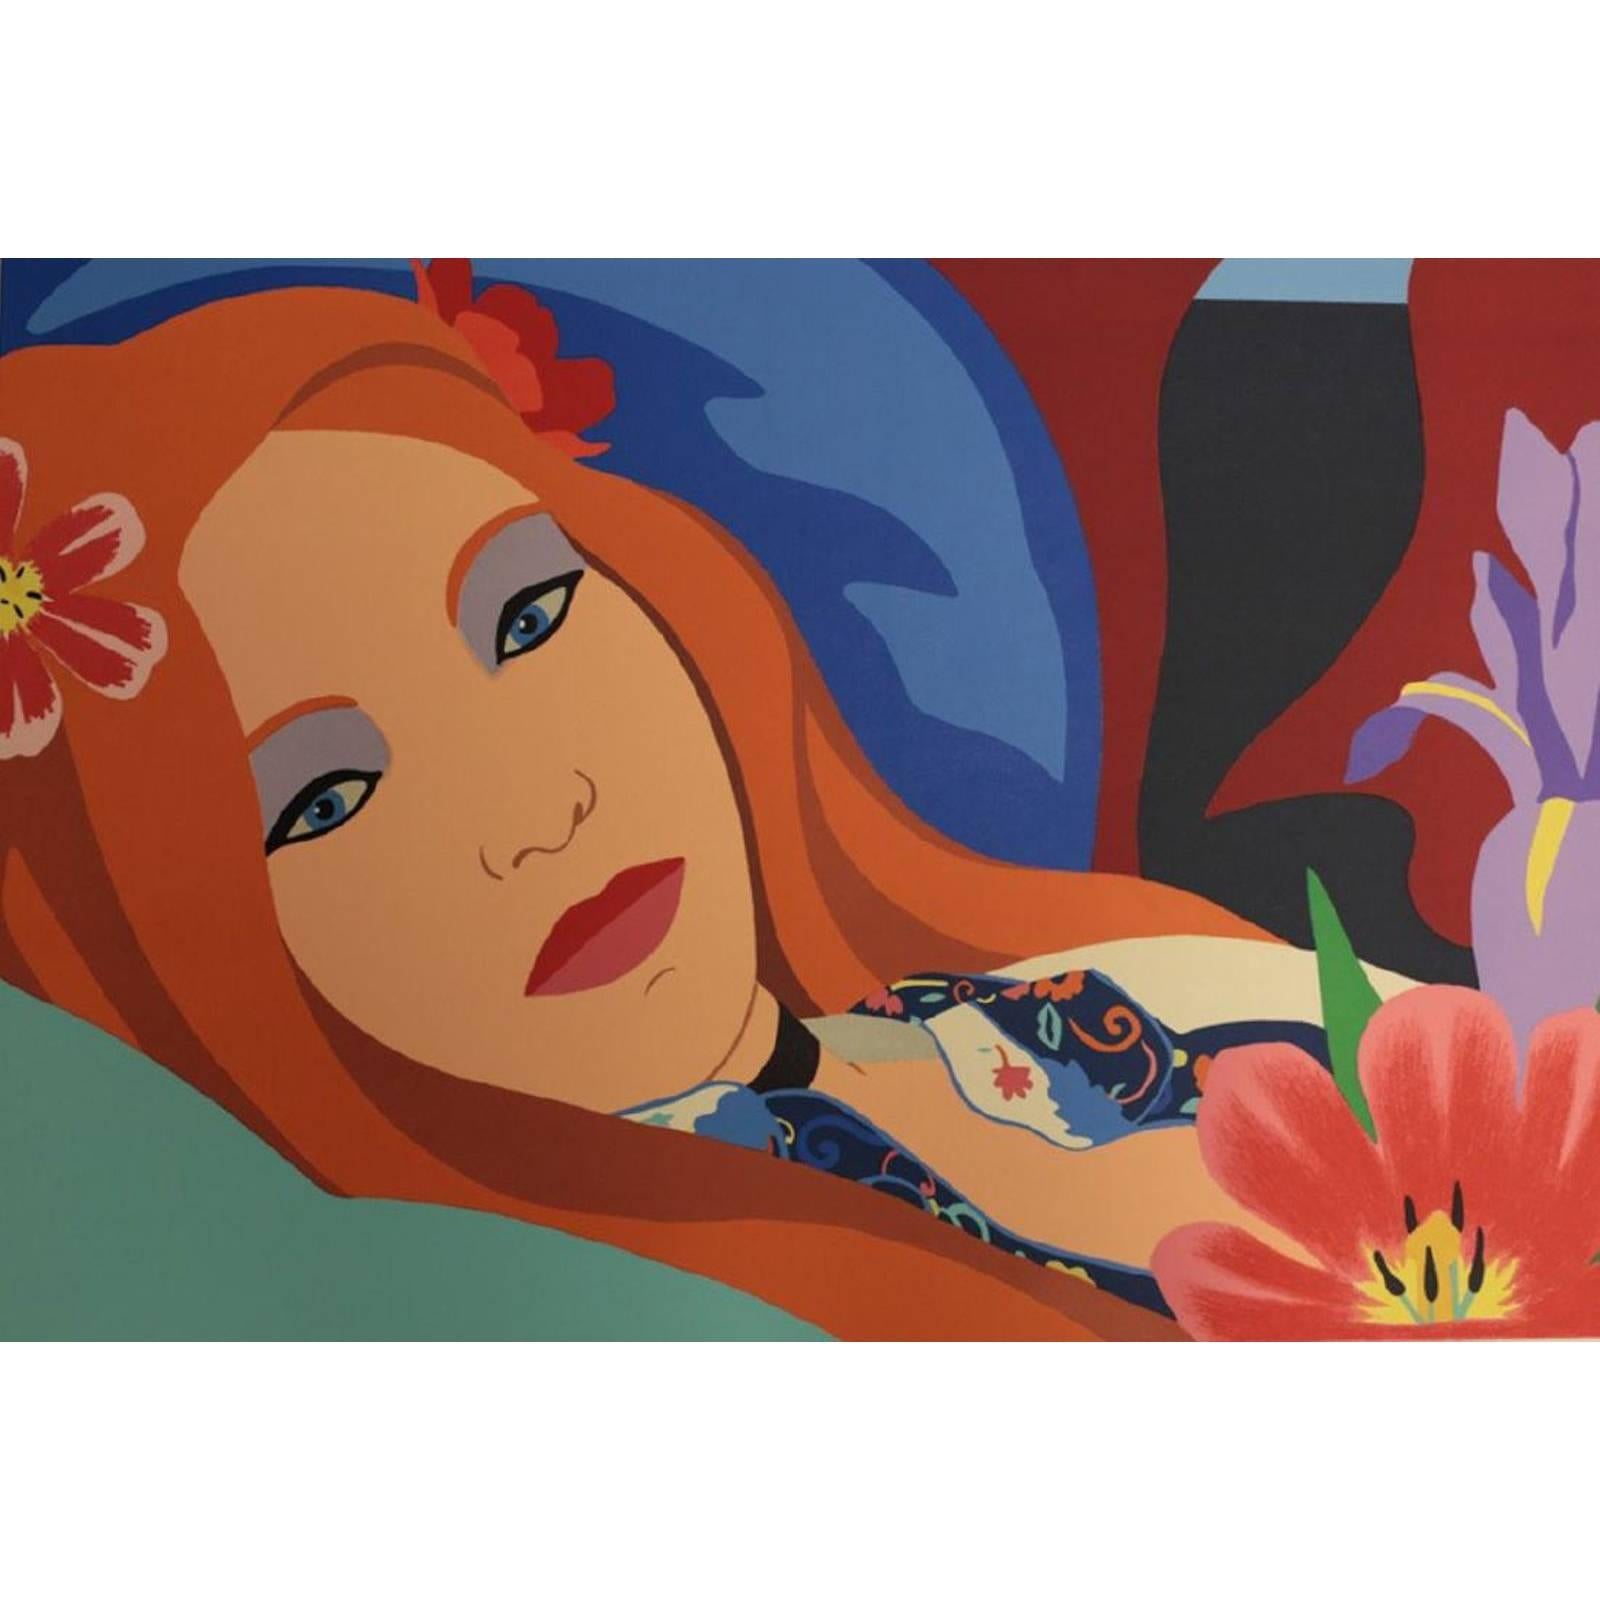 Colored Lithograph "Lulu" by Tom Wesslemann